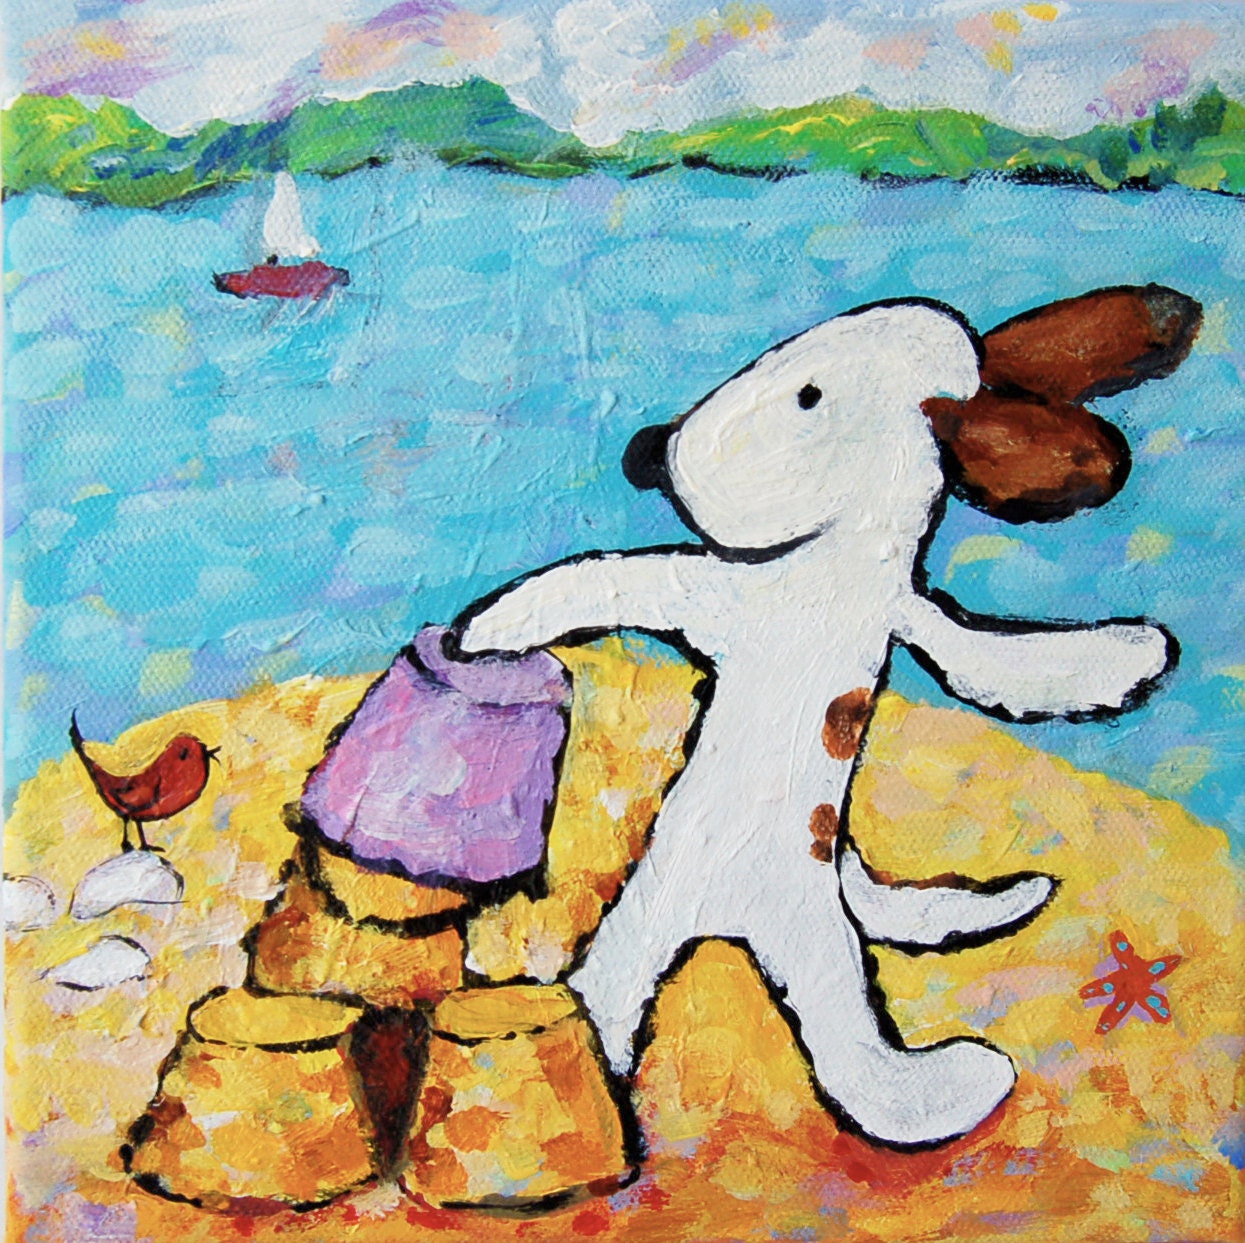 whimsical, dog painting, sandcastle, beach, childrens art - everygoodcolor